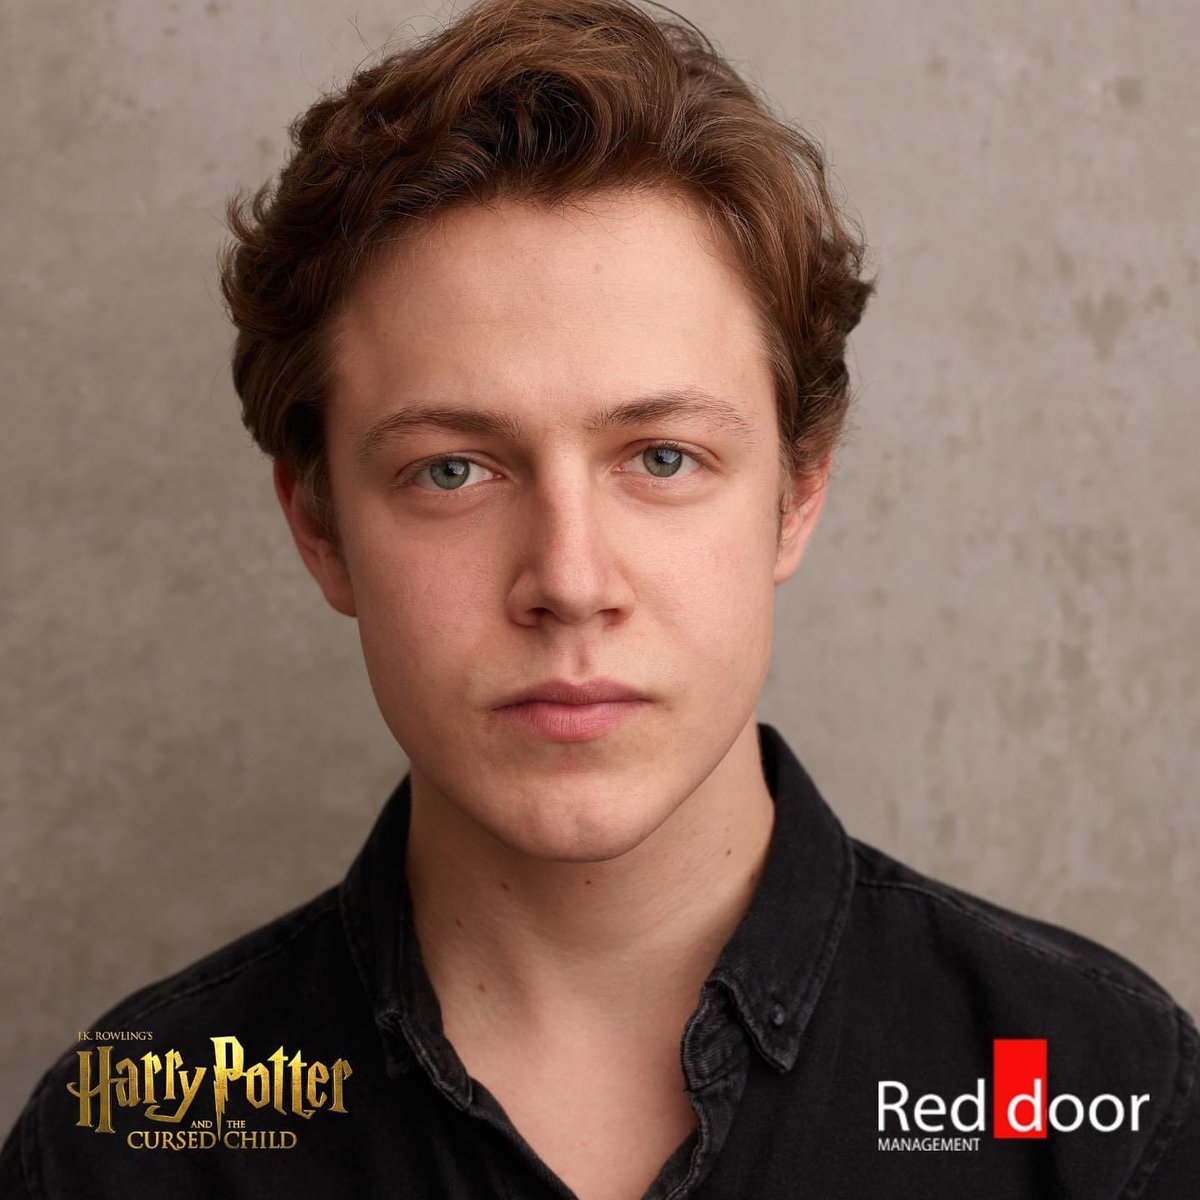 Wishing Red Door’s Kelton Hoyland and all the rest of the cast & company a magical opening night of Harry Potter and the Cursed Child⚡️

@CursedChildLDN #cursedchildldn #harrypotterandthecursedchild #reddoormanagement